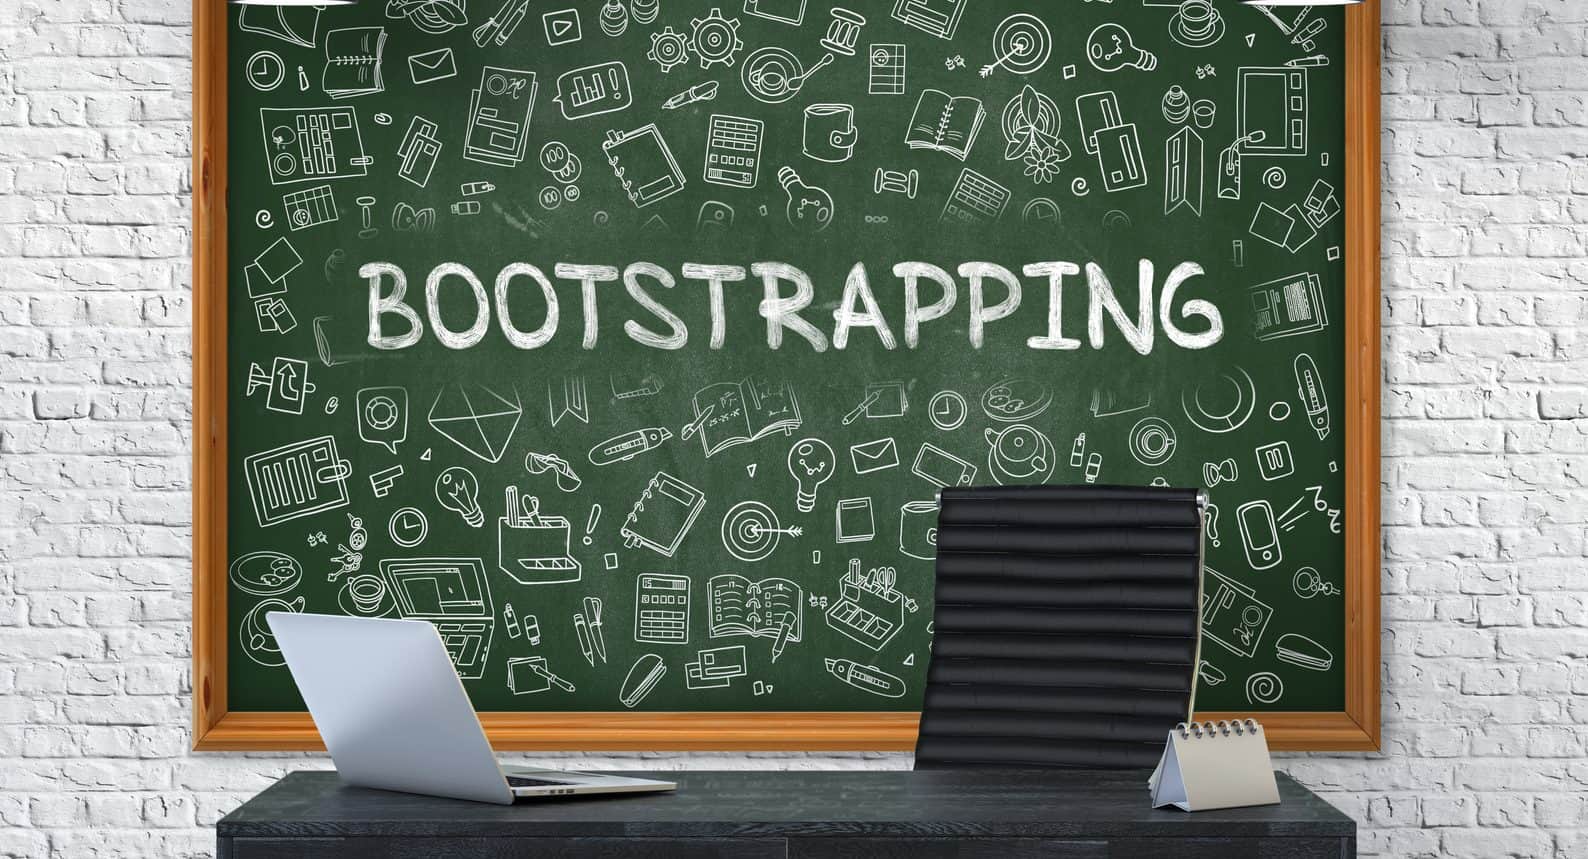 Startup Bootstrapping